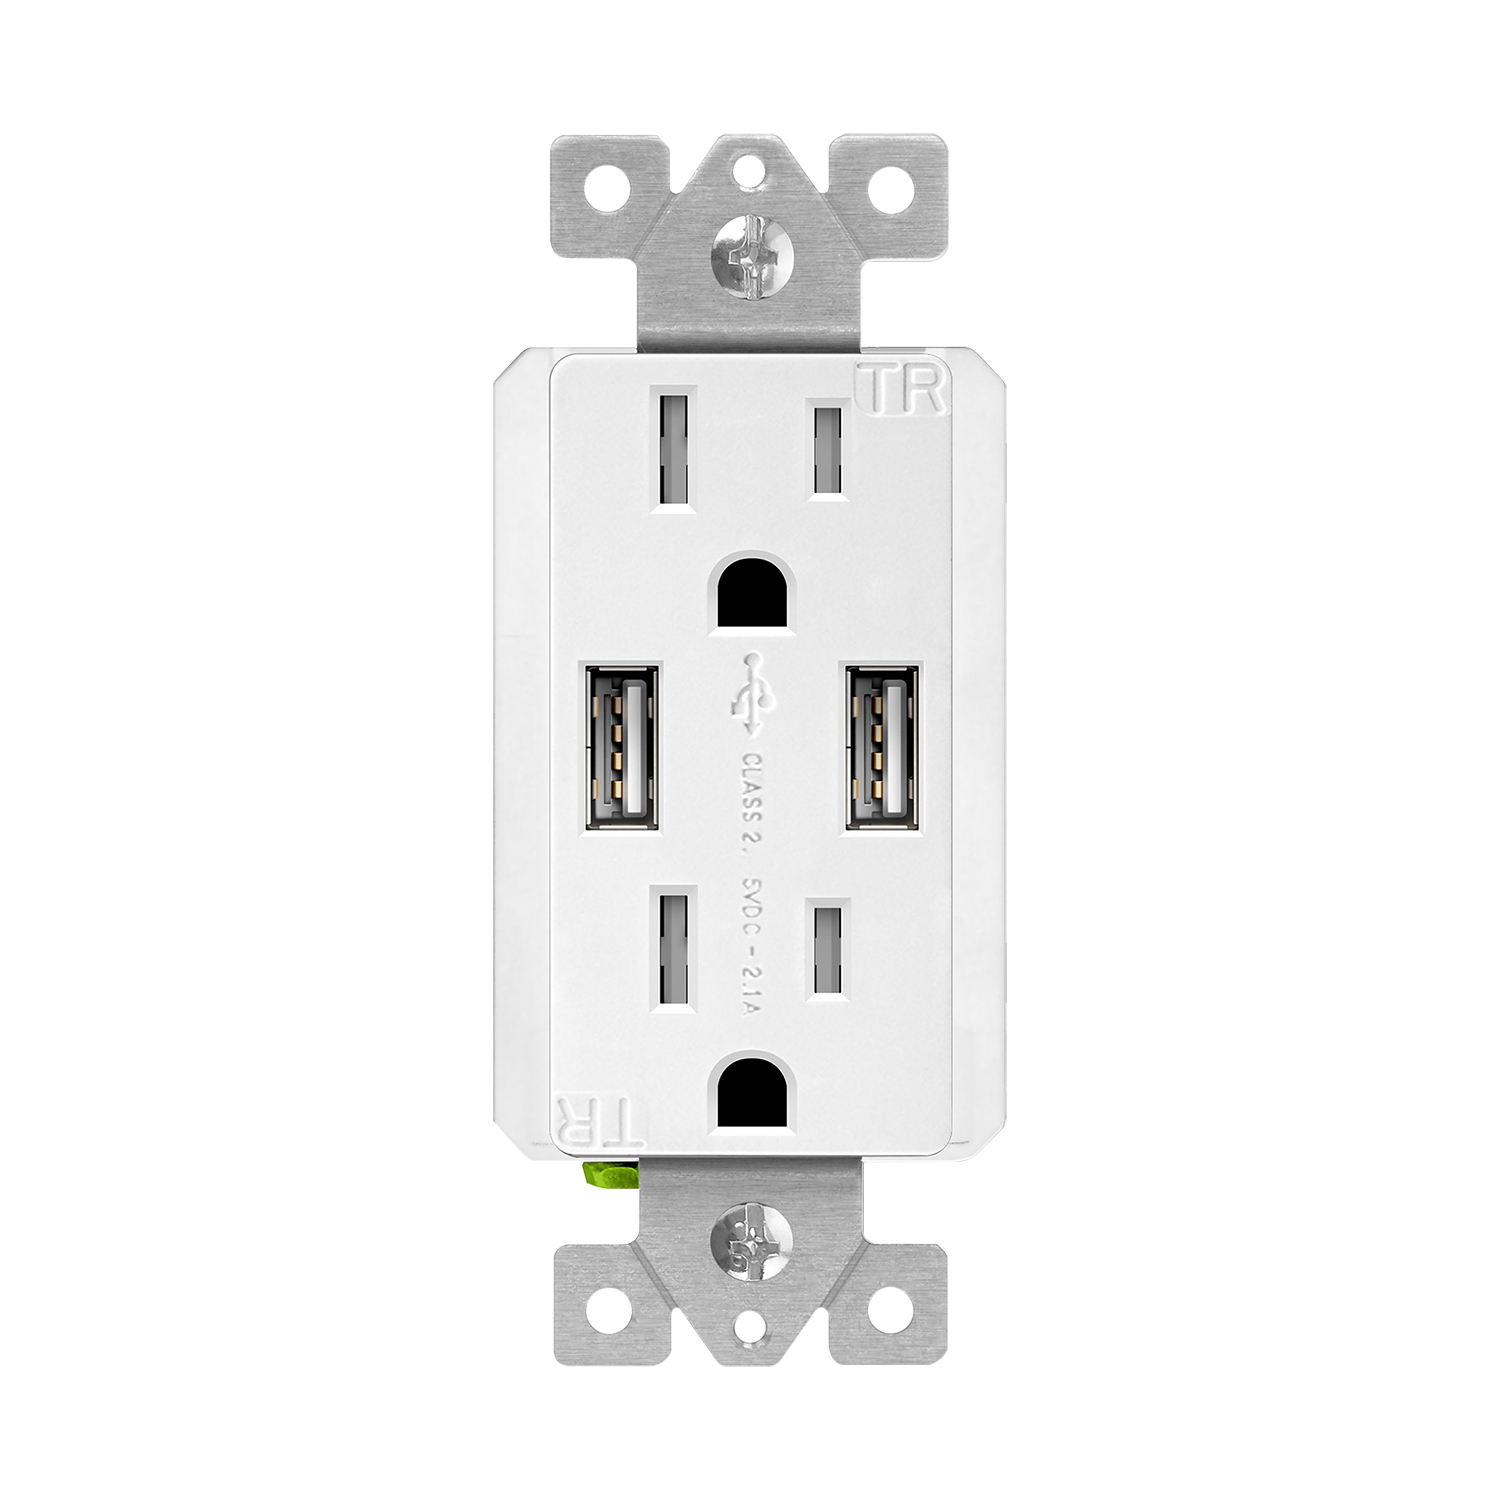 TOPGREENER Quick Charging 2.0 USB Outlet 15A Receptacle Fast Charger 